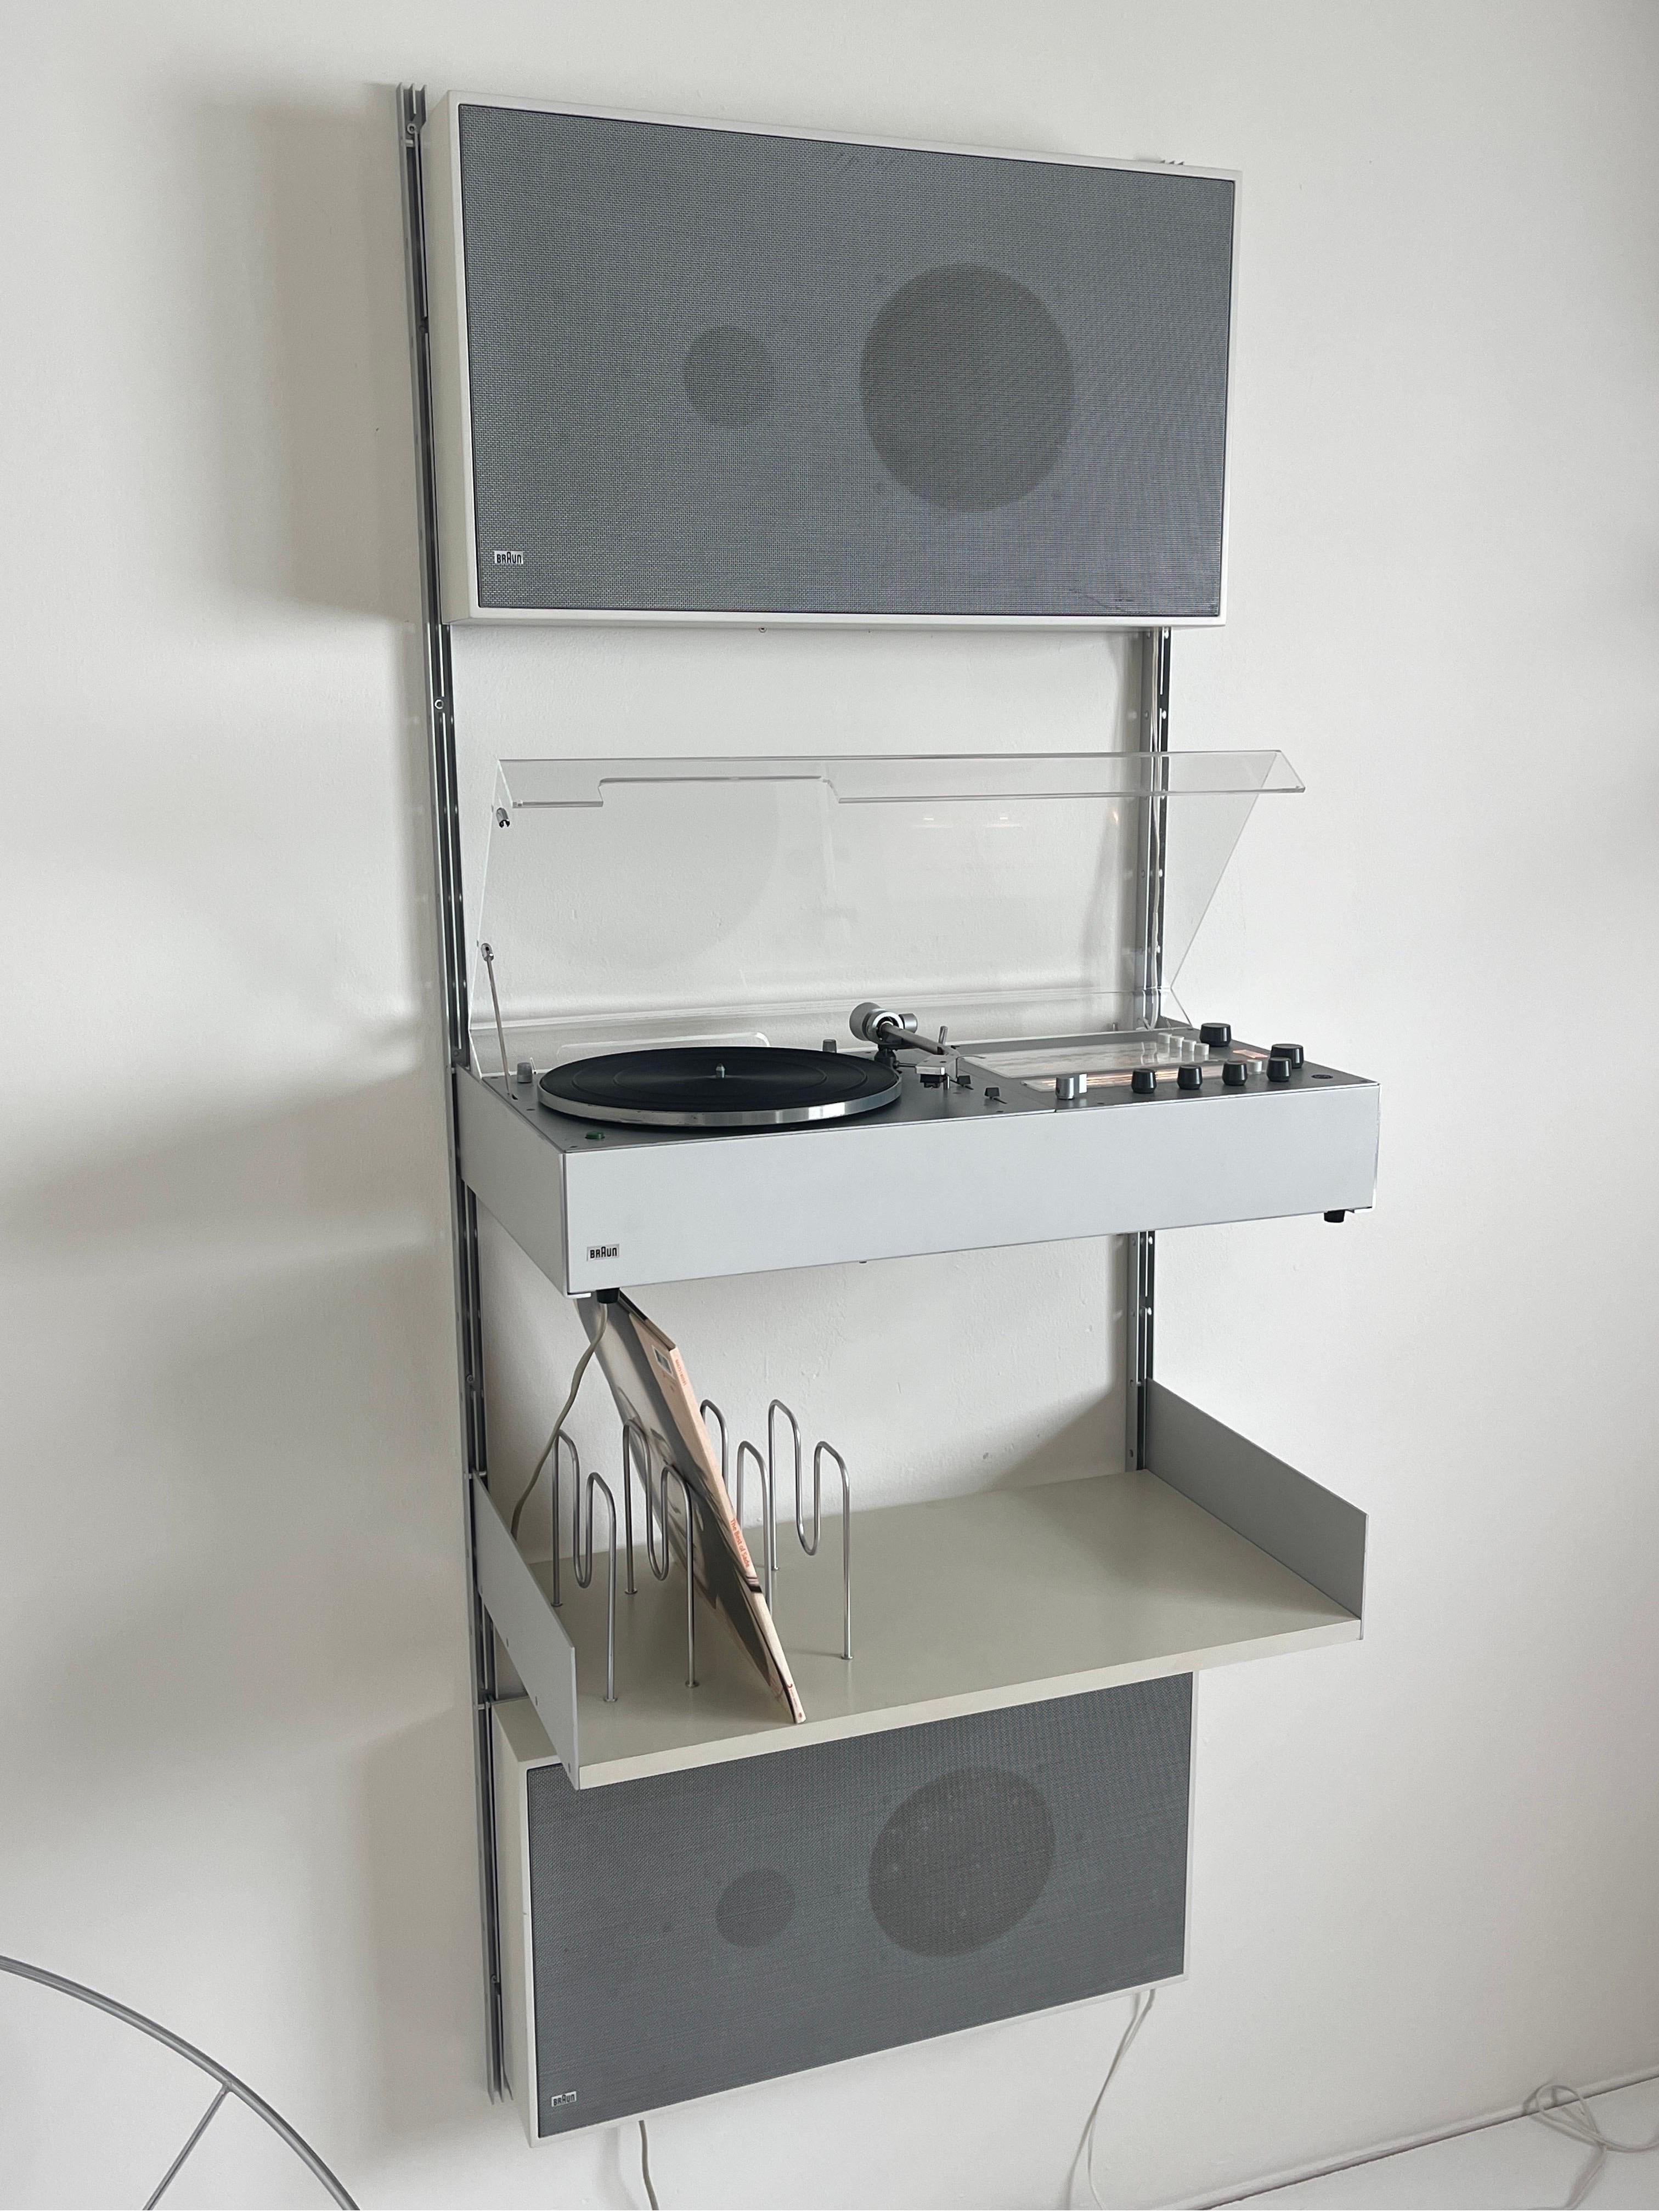 Braun wall mounted audio system designed by Dieter Rams for Braun, 1960's/70's. Equip with Braun Audio 310, L46 wall speakers, and vintage Vitsoe  shelf/e-tracks. Everything included in the picture except the Sade vinyl. Audio 310 is is equip with